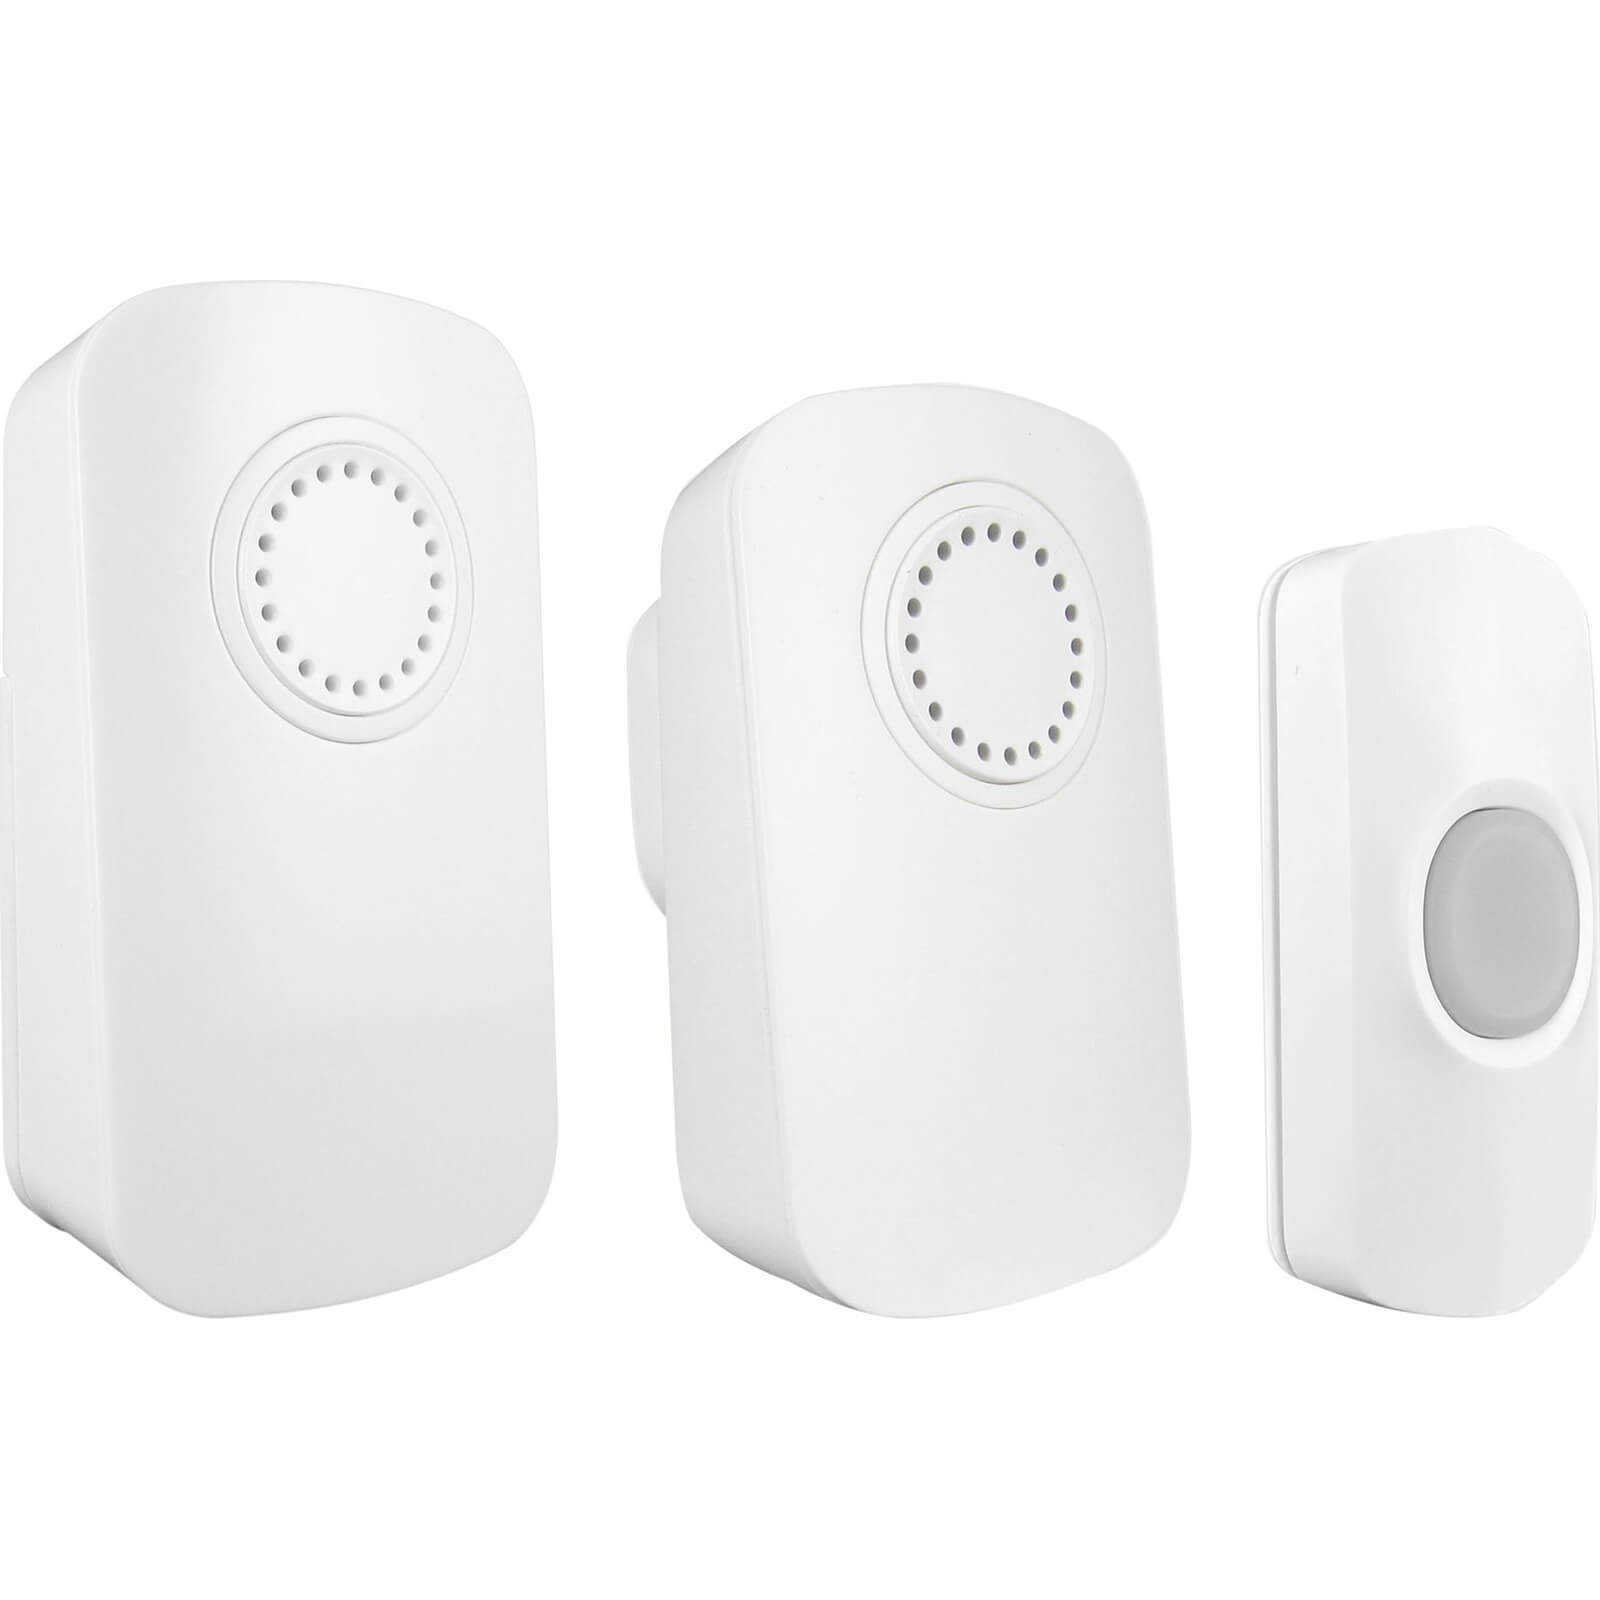 Uni-Com Smart Portable and Plug In Door Chime Set